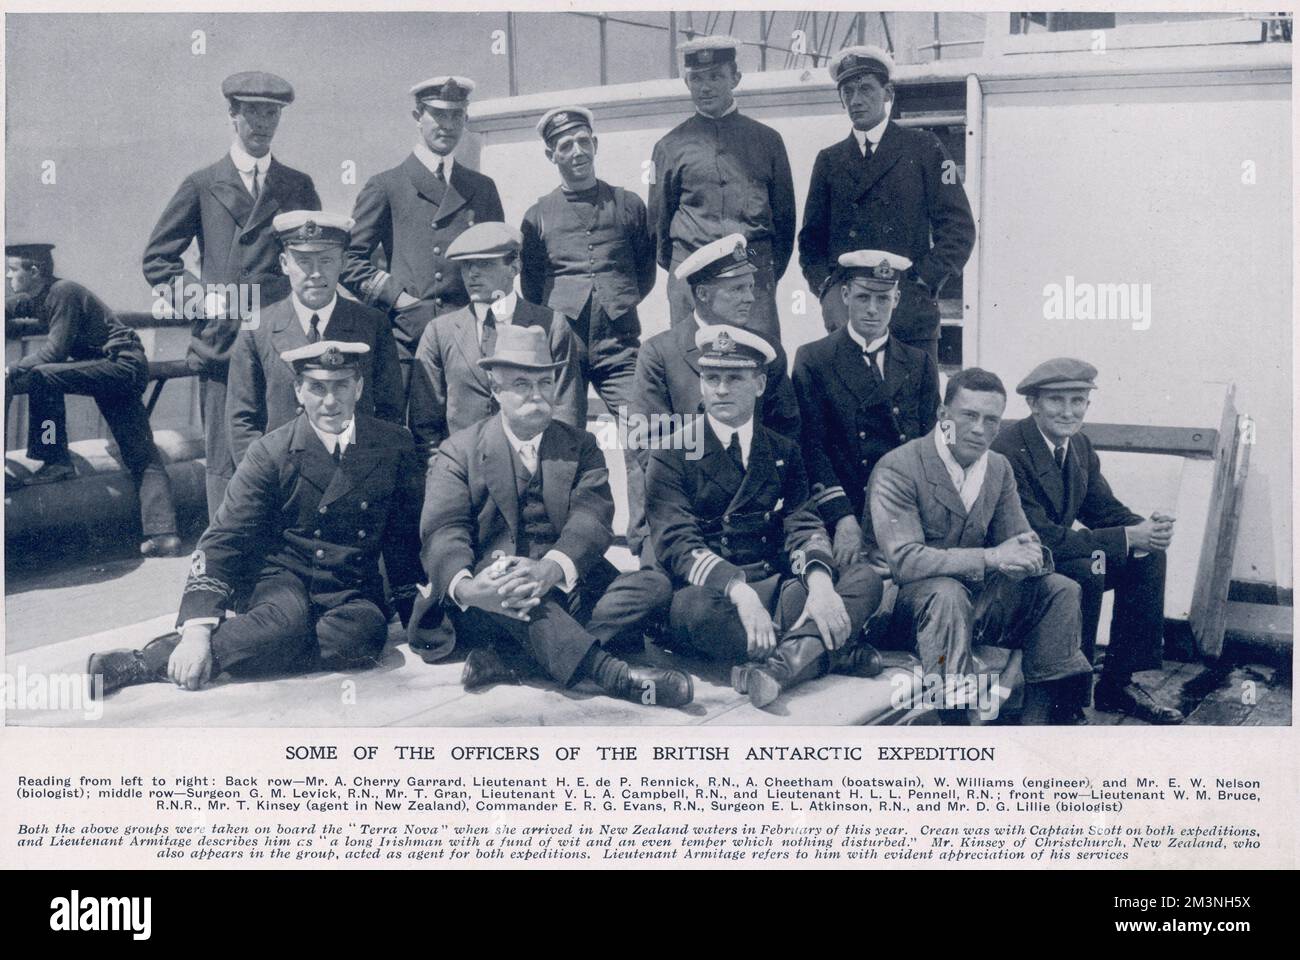 Officers on board the Terra Nova on its return to New Zealand in February 1913 after the discovery of the bodies of Captain Scott and his companions.  From left to right.  Back row, Mr. A Cherry Garrard, Lieutenant H.E. de P. Rennick, A. Cheetham (boatswain), W. Williams (engineer) and Mr E. W. Nelson (biologist).  Middle row, Surgeon G. M. Levick, Mr. T. Gran, Lieutenant V.L.A. Campbell and Lieutenant H.L.L. Pennell; front row, Lieutenant W.M. Bruce, Mr T. Kinsey (agent in New Zealand), Commander E.R.G. Evans, Surgeon E. L. Atkinson and Mr D.G. Lillie (biologist).     Date: 1913 Stock Photo